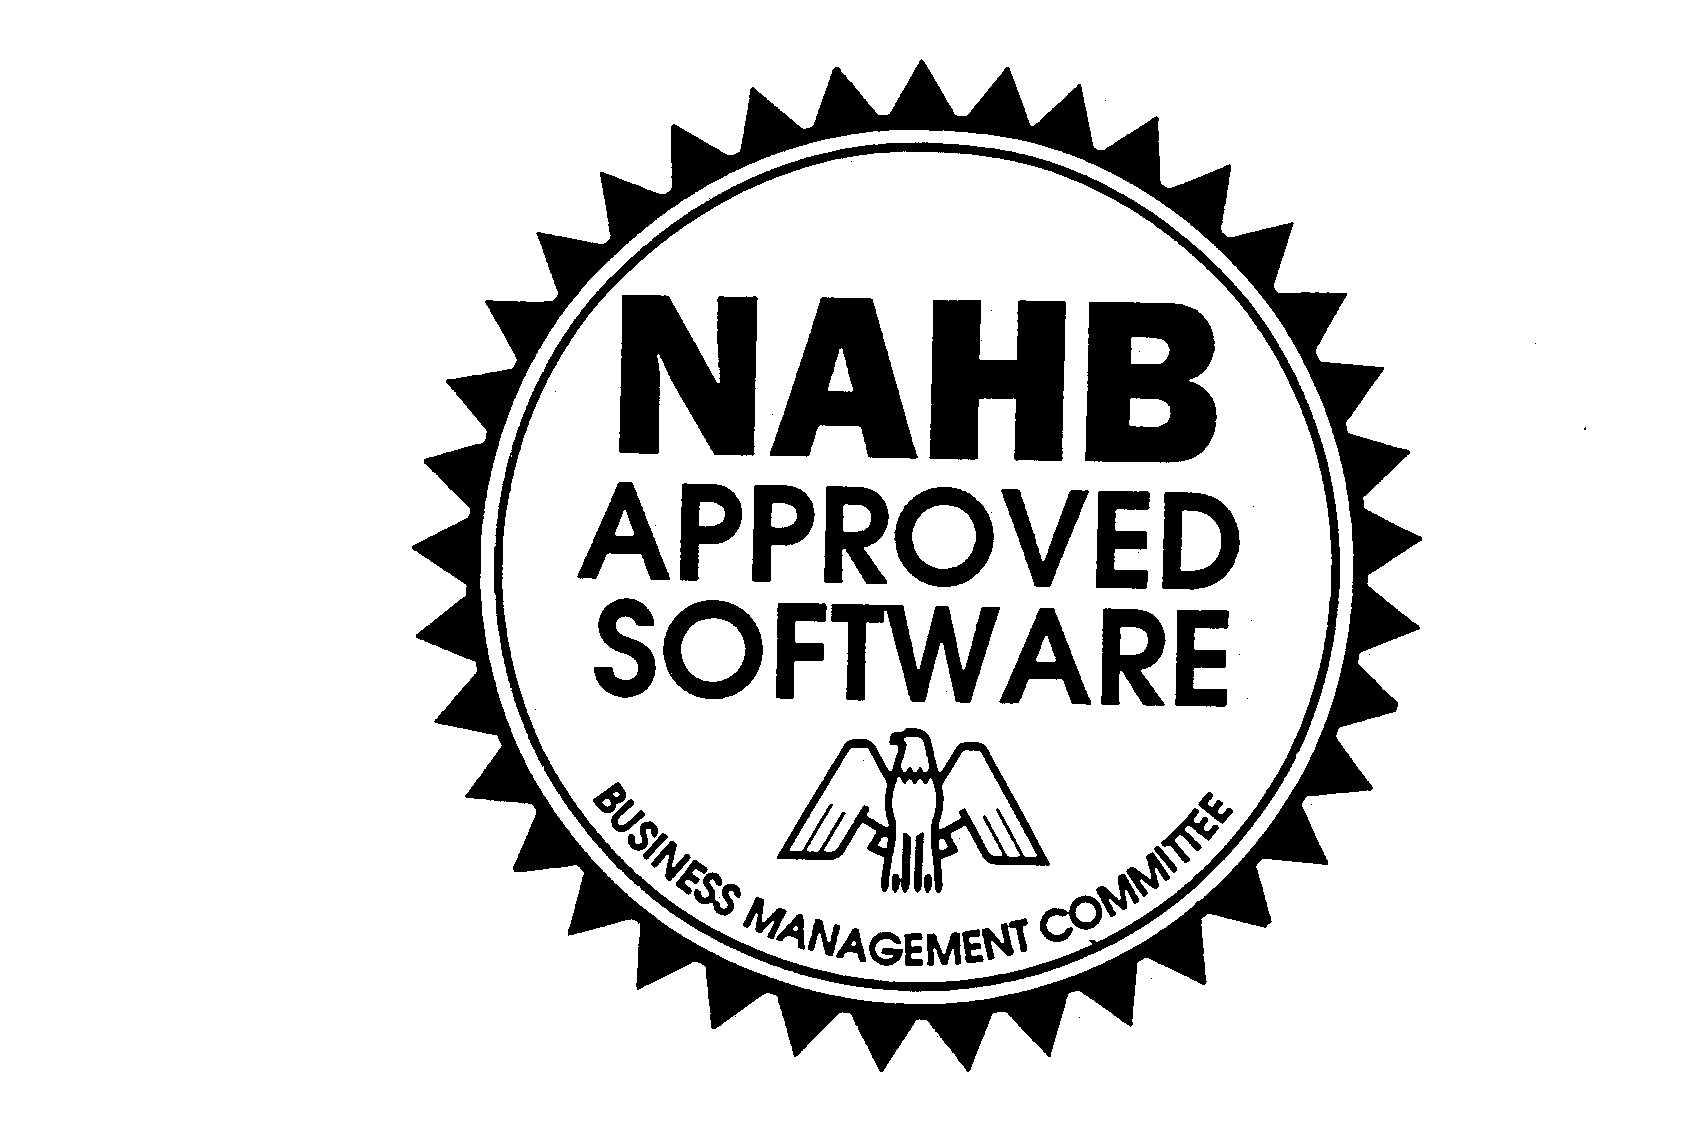  NAHB APPROVED SOFTWARE BUSINESS MANAGEMENT COMMITTEE